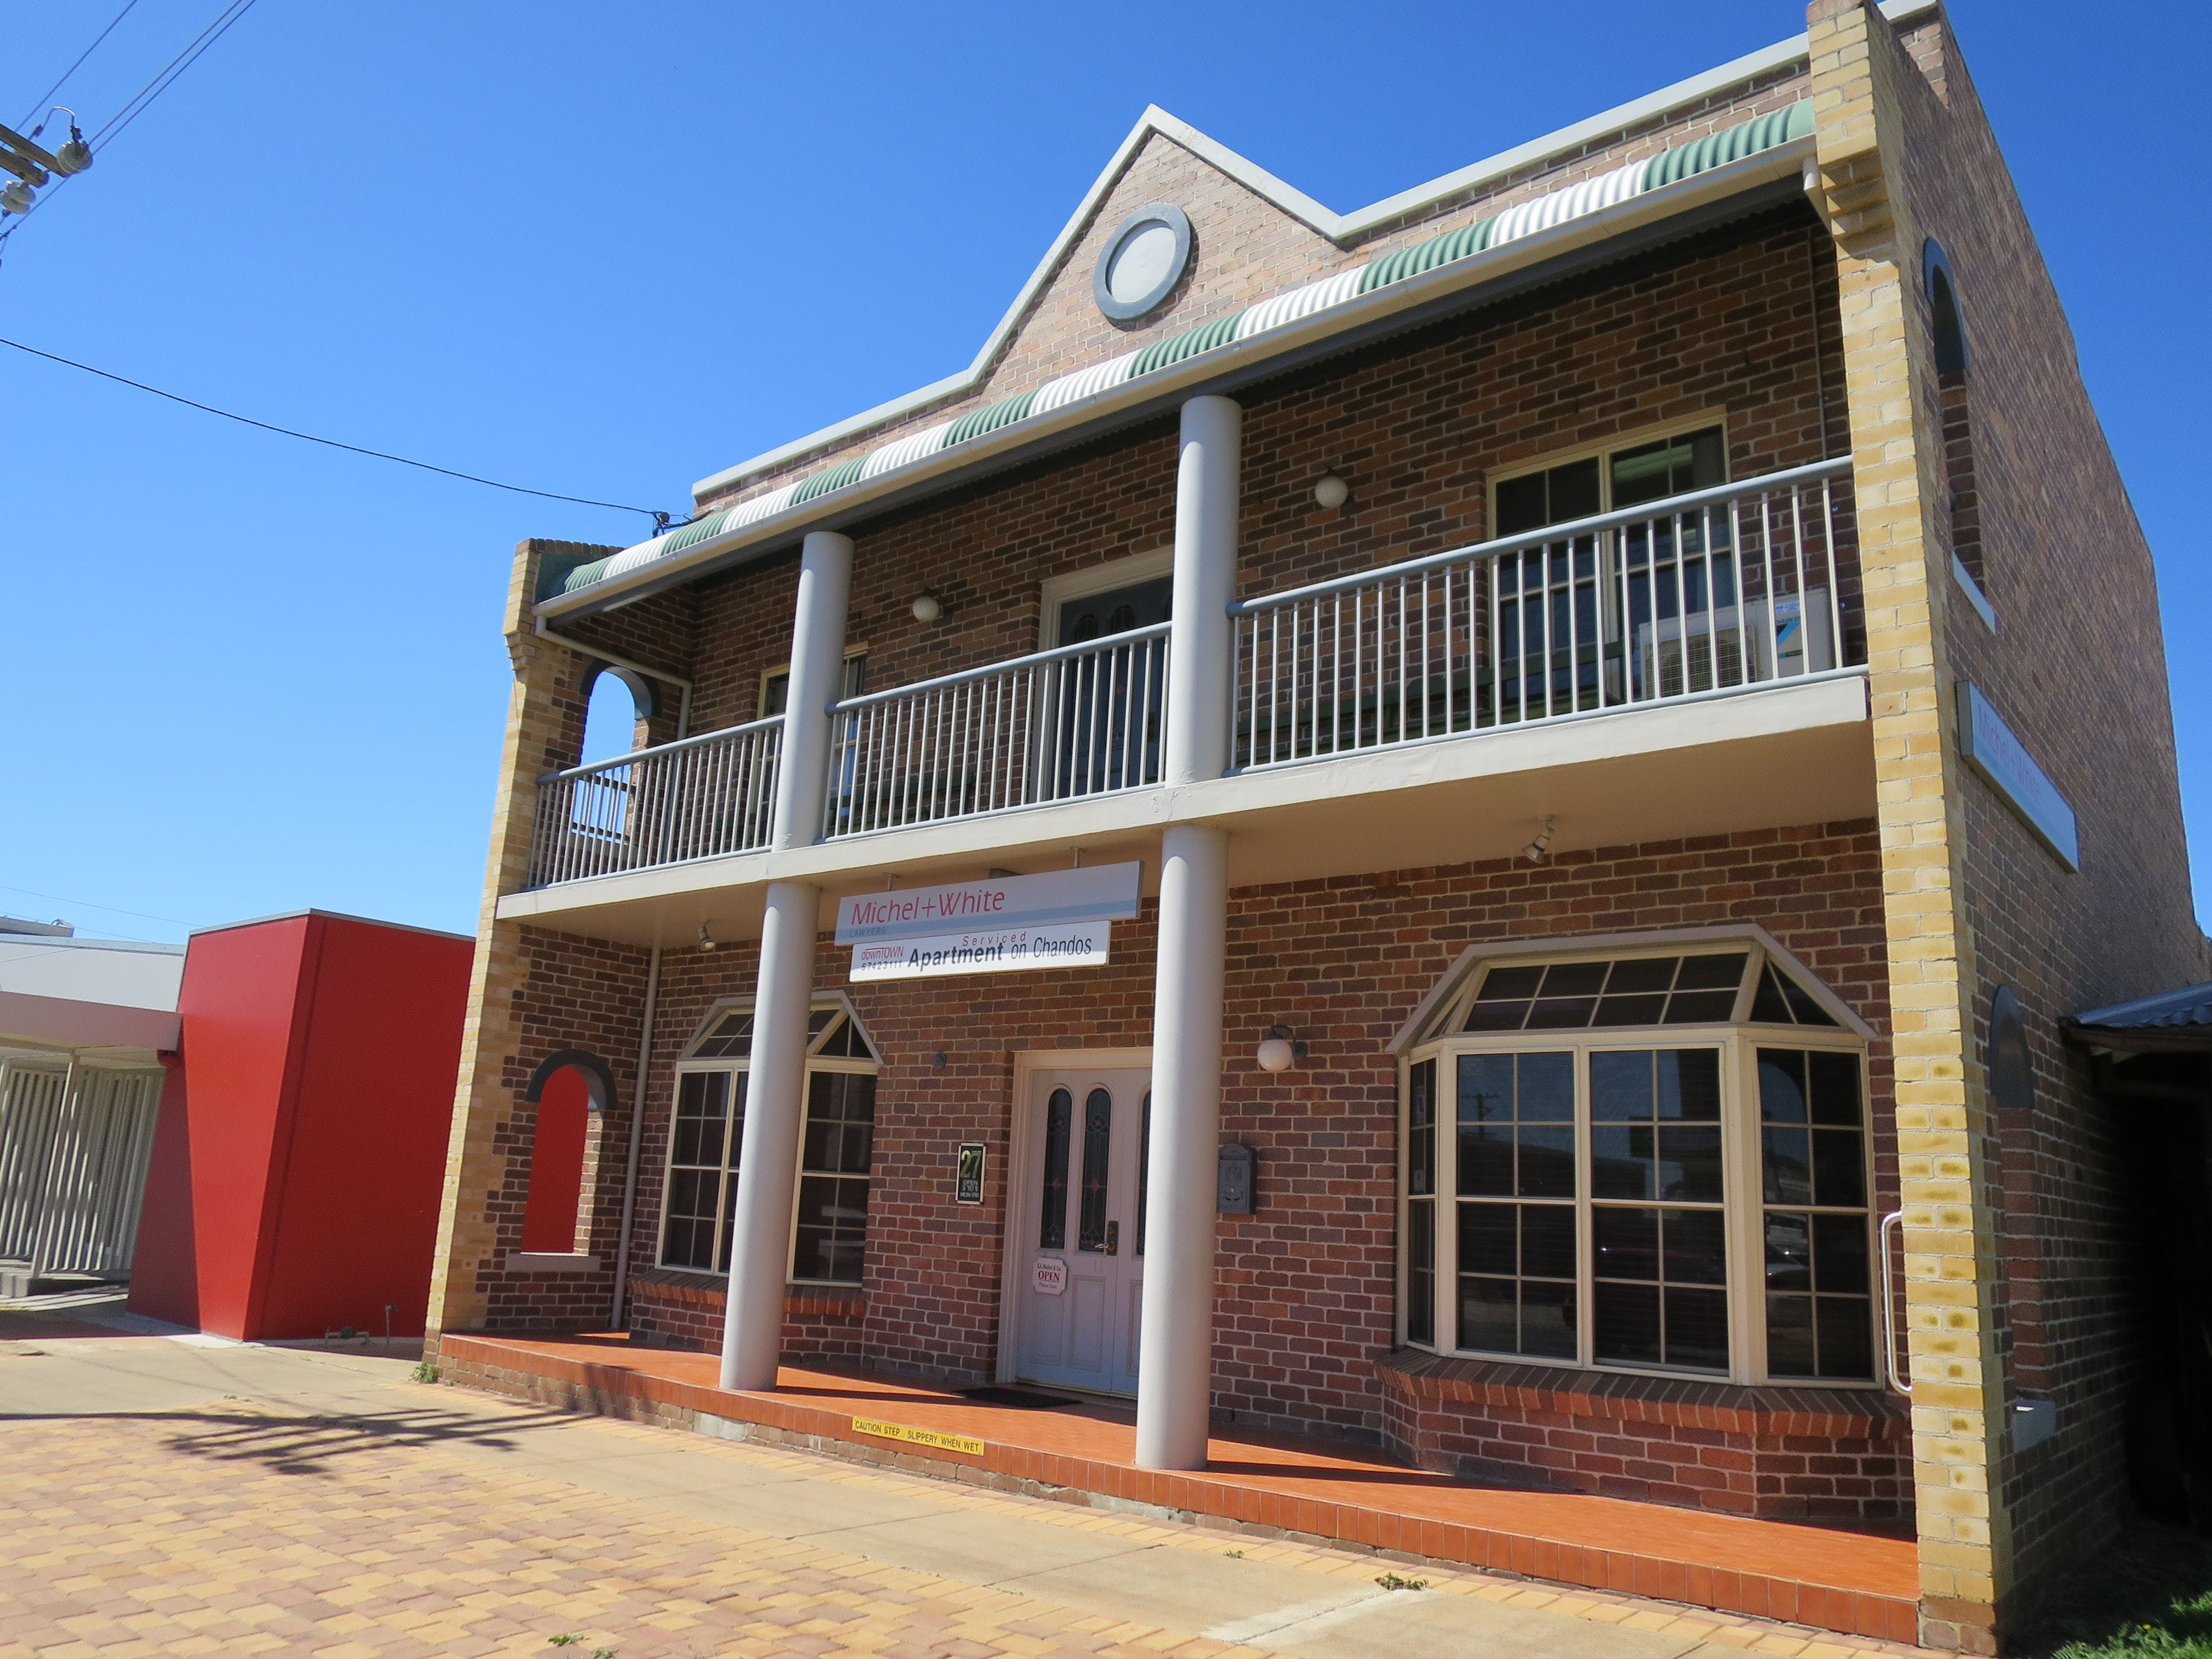 Downtown Apartment on Chandos - Hervey Bay Accommodation